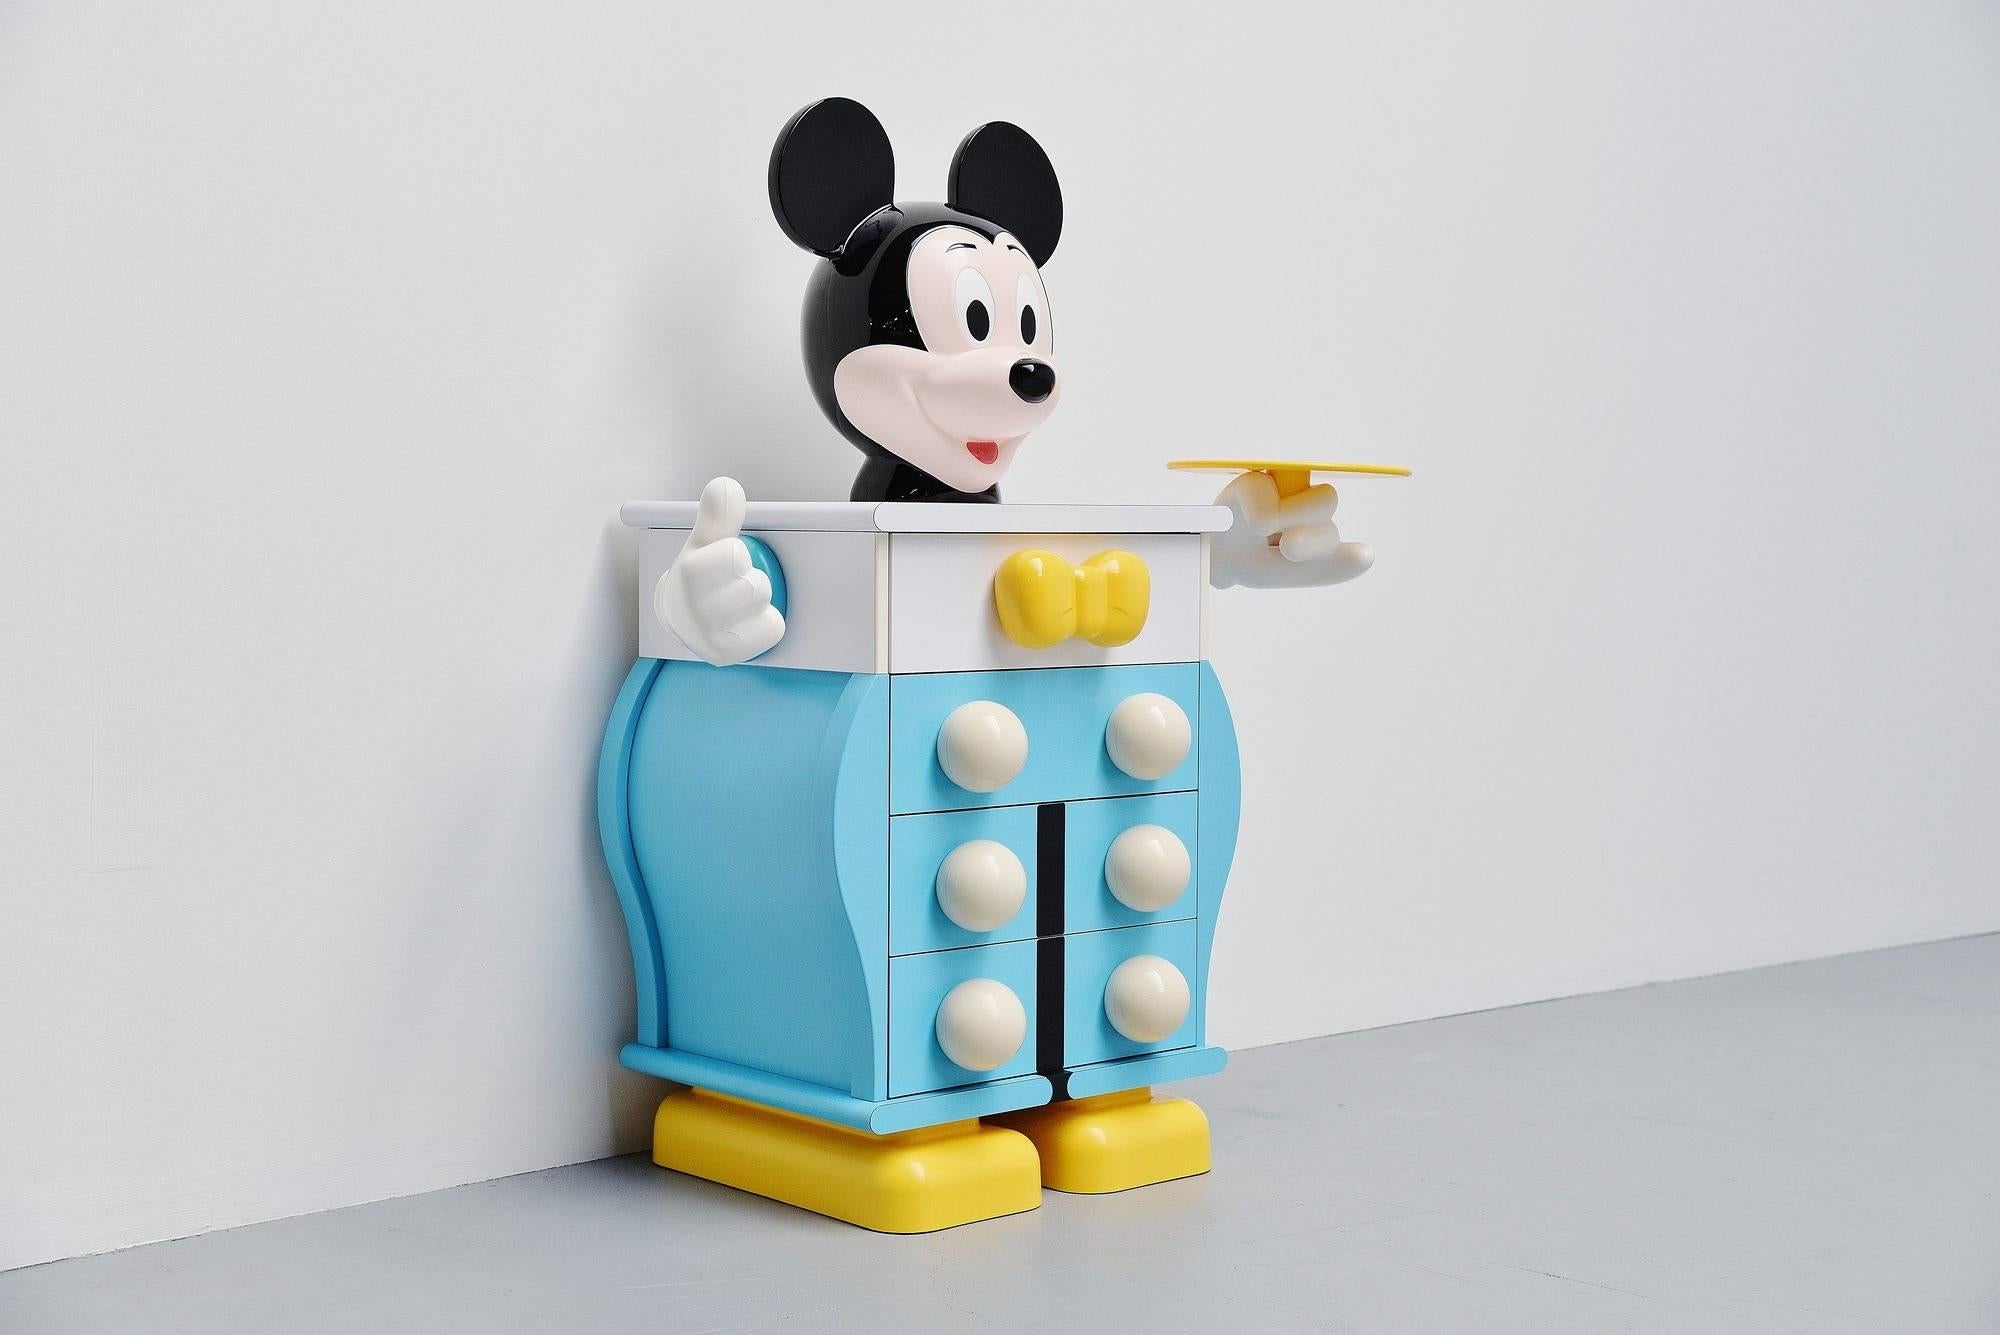 Iconic chest of drawers designed by Pierre Colleu and manufactured by Starform under Disney License, France 1988. This cabinet is completely made of laminated wood and plastic and has four drawers for storage. Who wouldn't want Mickey Mouse in his